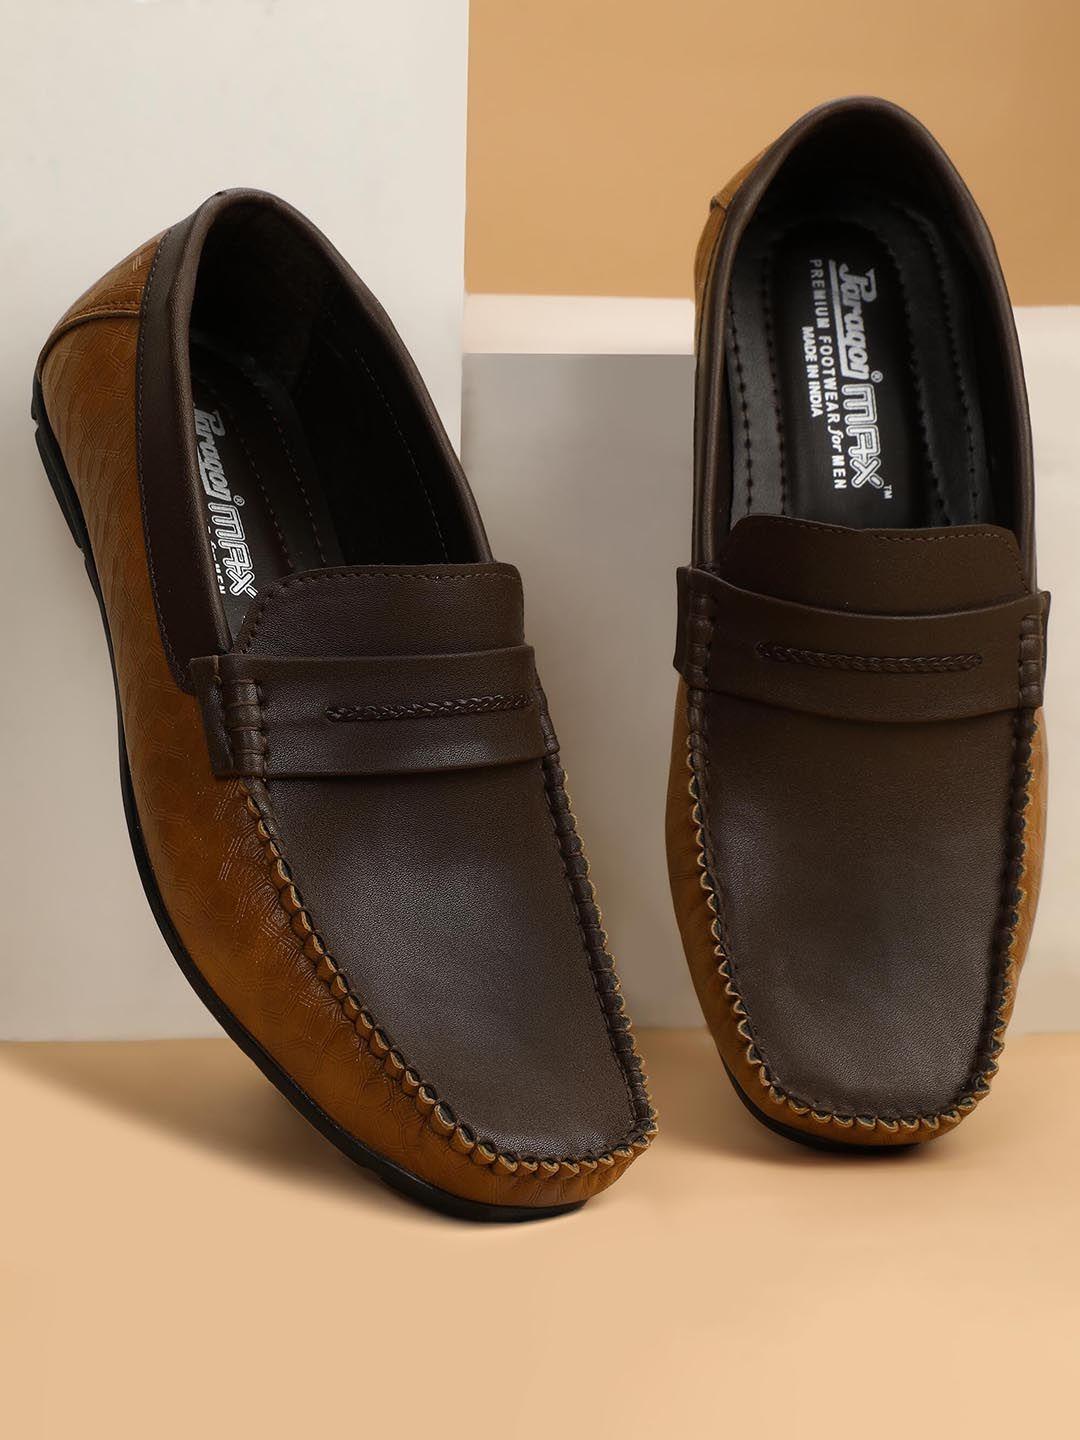 paragon-men-anti-skid-sole-formal-penny-loafers